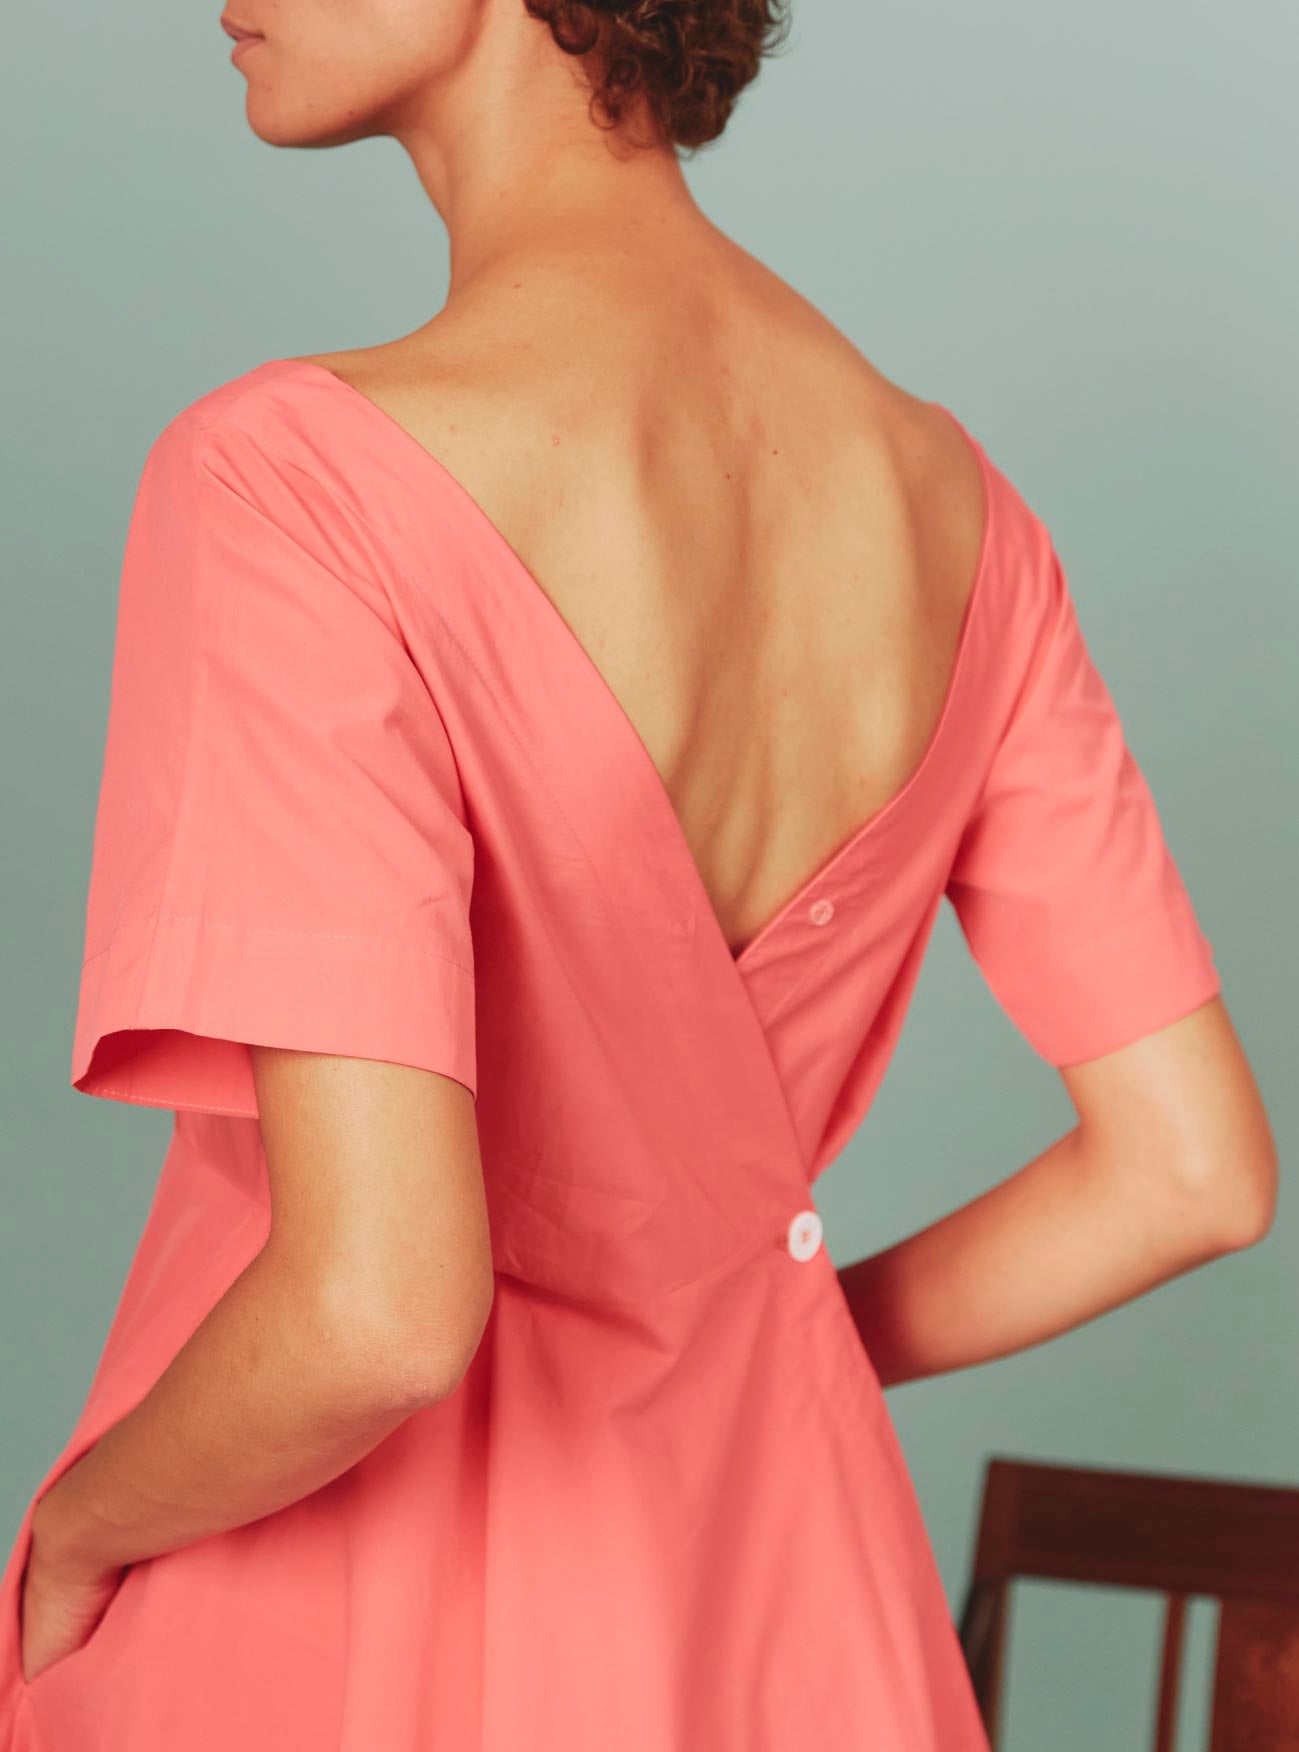 Back detail of Allegria Dress: Matisse Plain Poplin in Watermelon by Thierry Colson